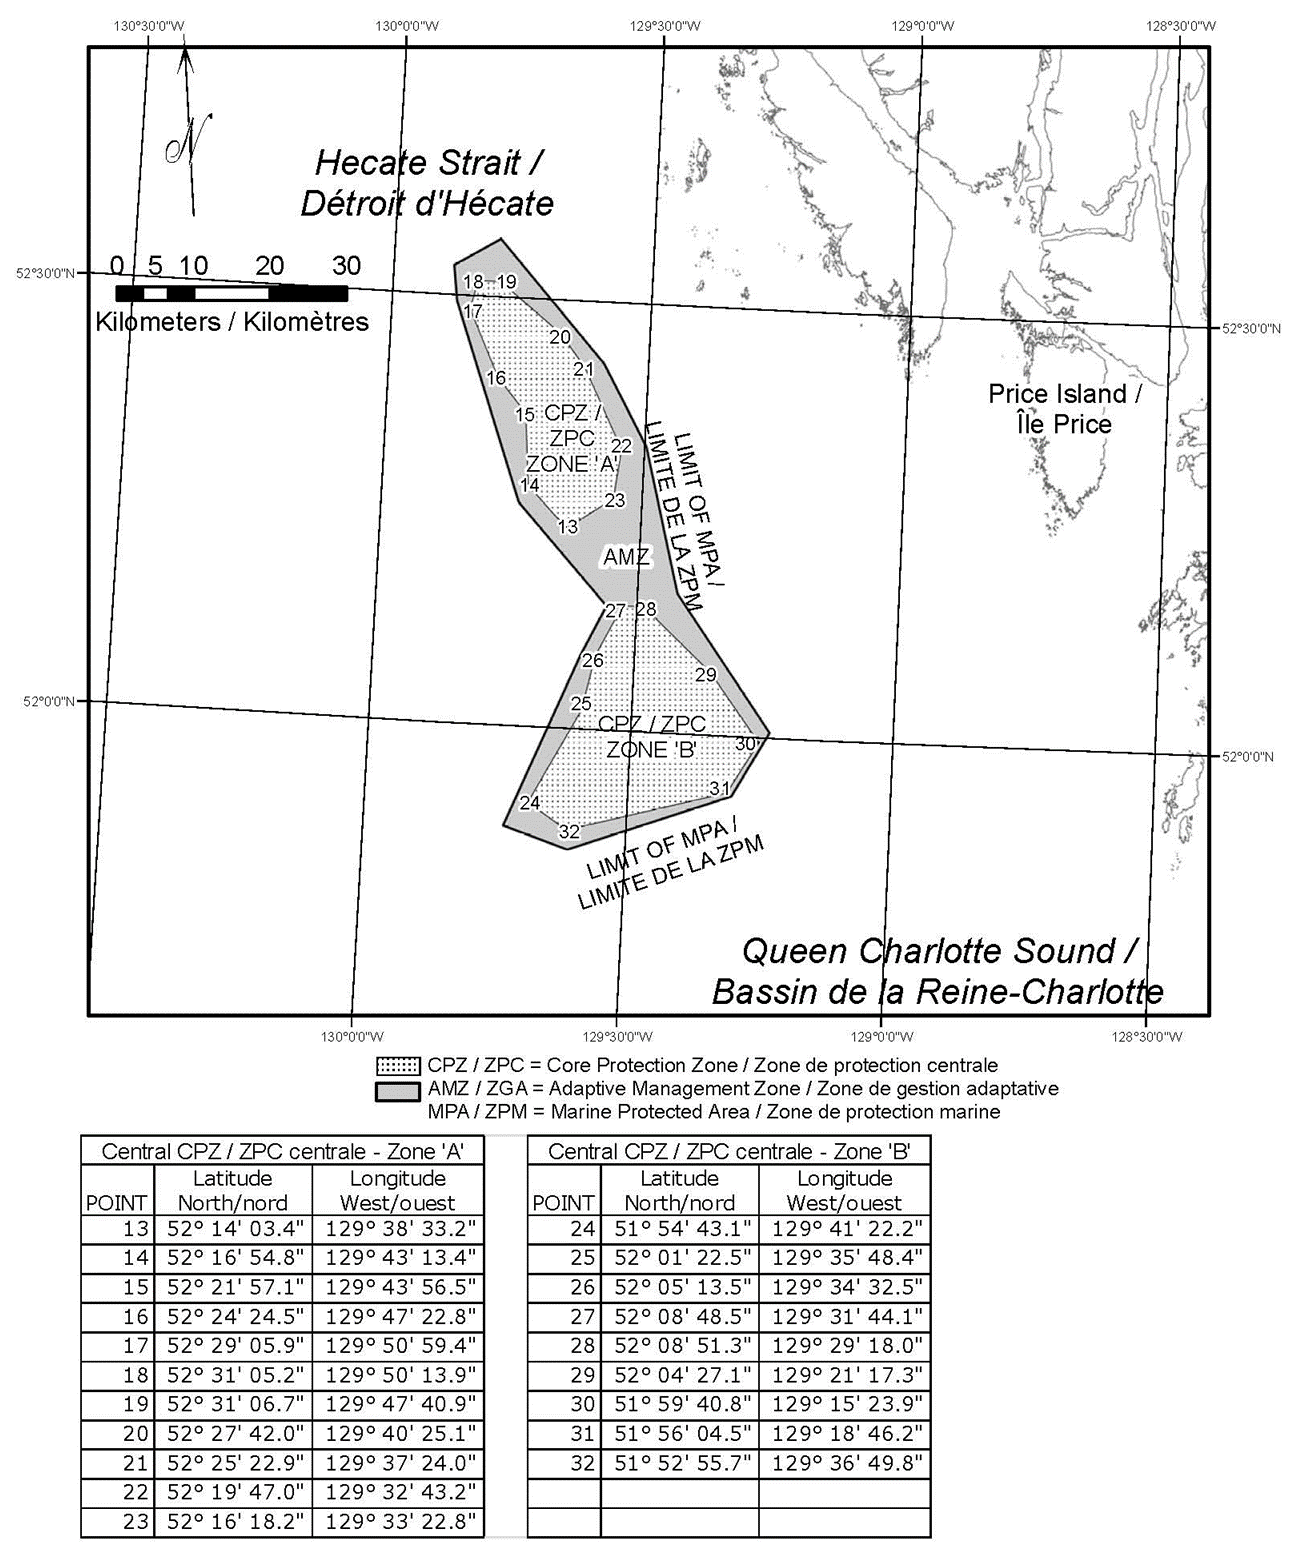 Map of the Central Reefs Marine Protected Area, depicting the core protection zone, adaptive management zone, and marine protected area in various shades of grey. The coordinates can be found on the bottom left corner.